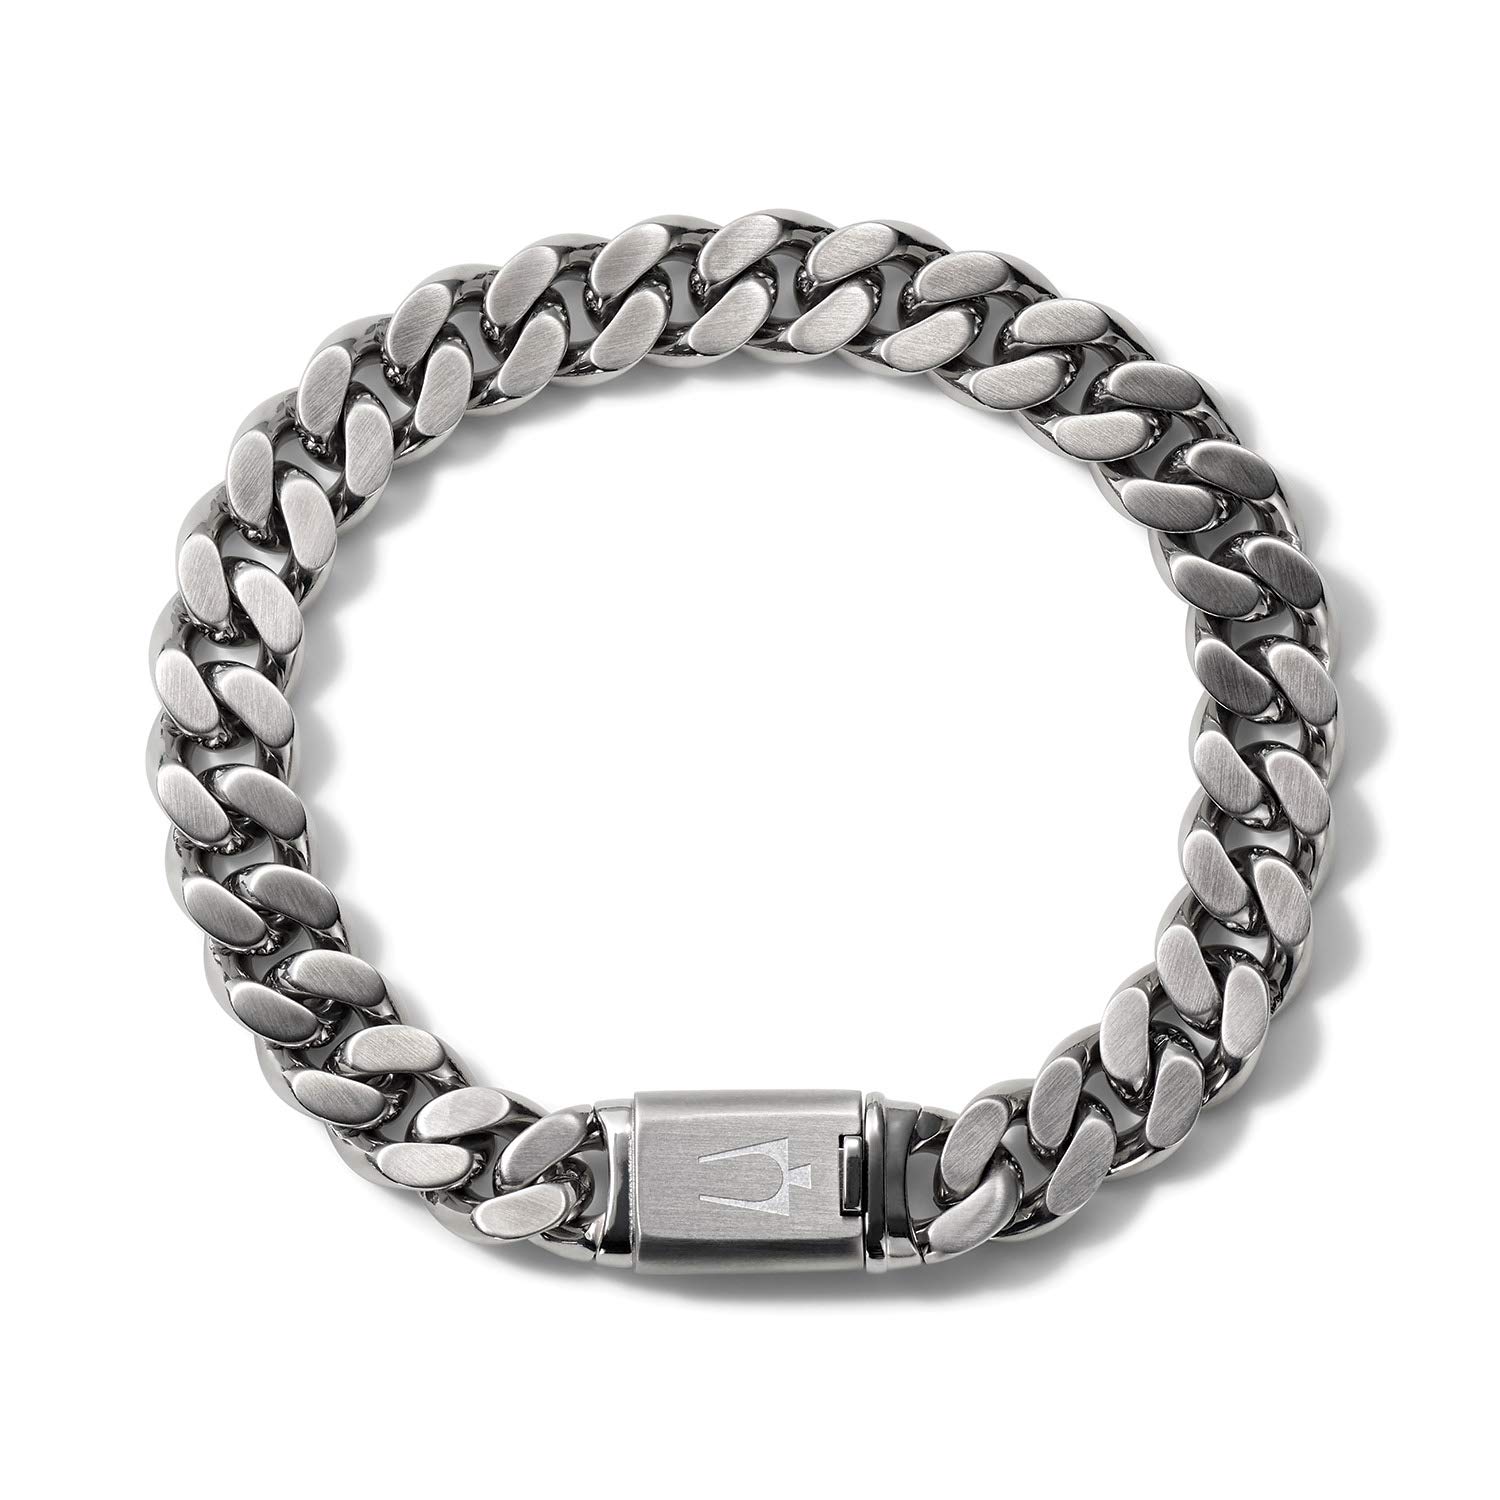 Bulova Jewelry Men's Classic Stainless Steel Chain Link Bracelet with Clasp Closure